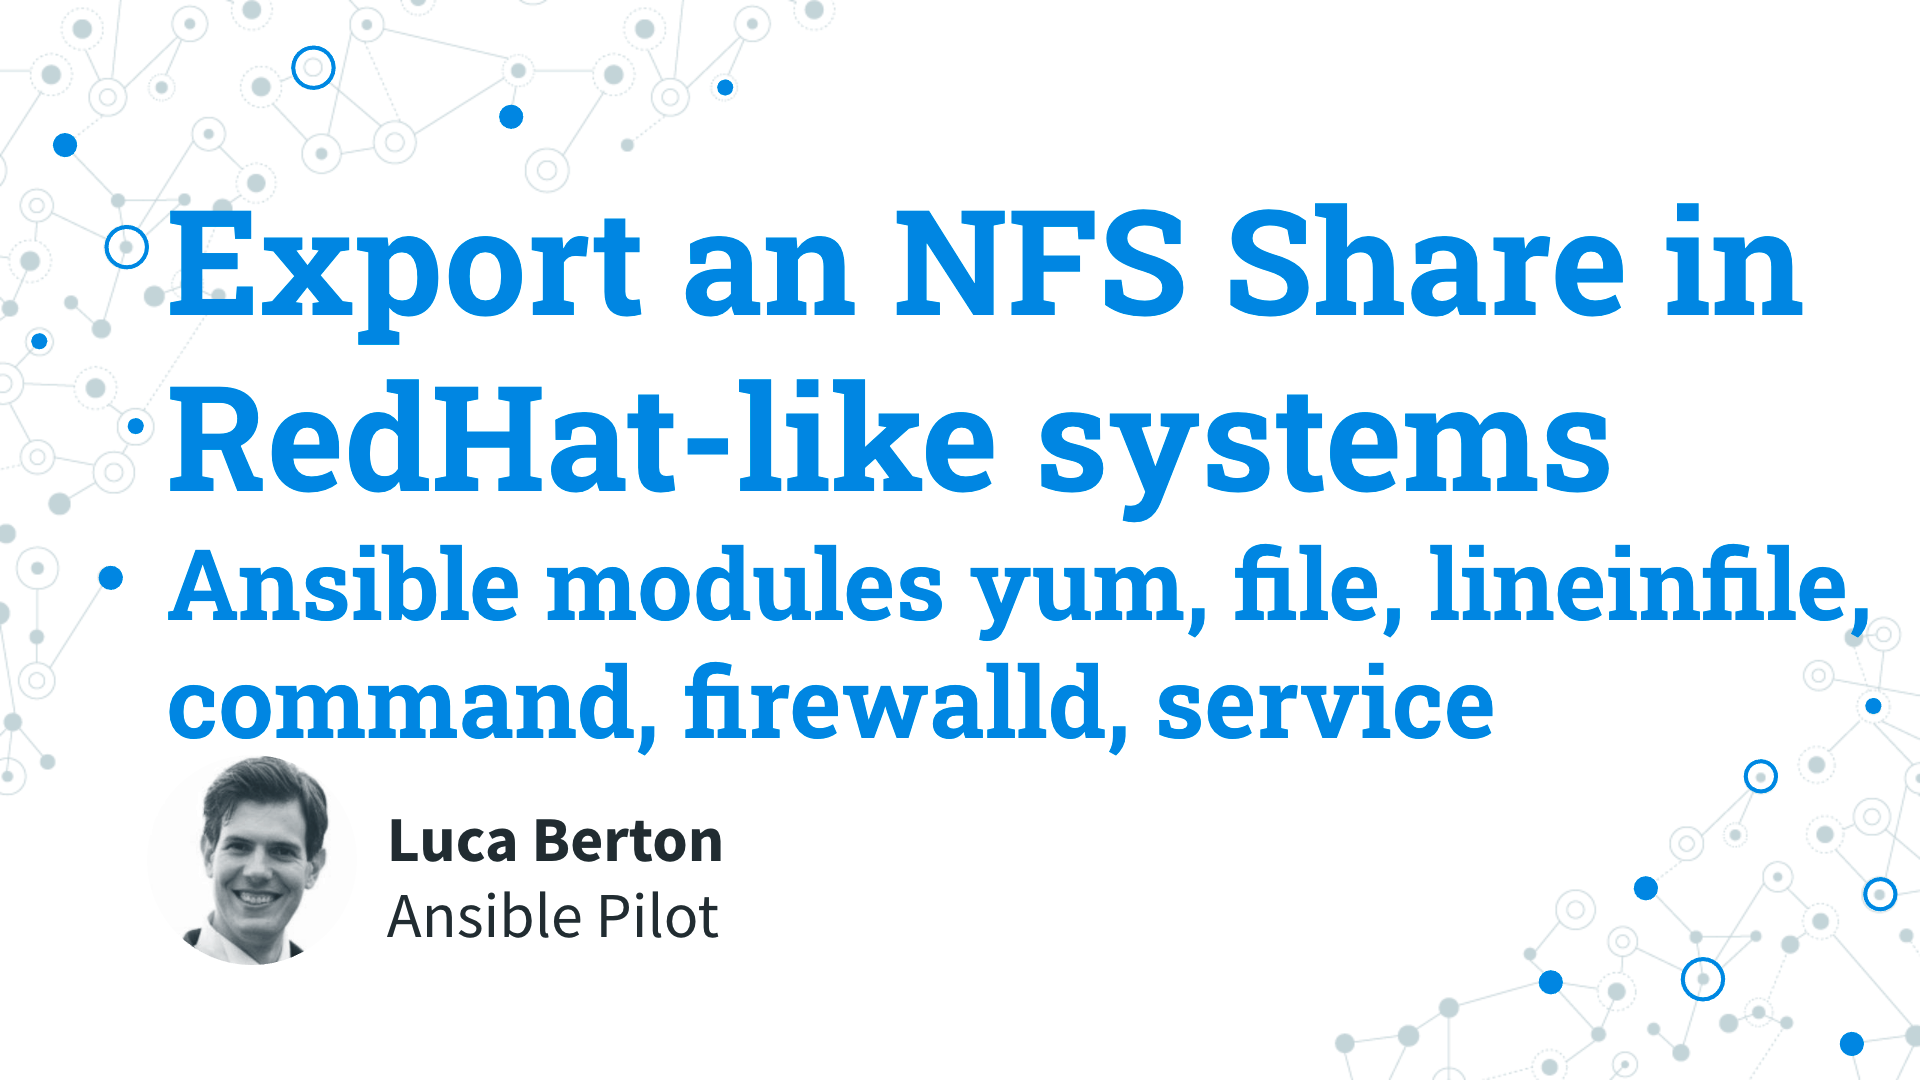 NFS Server - Export an NFS Share in RedHat-like systems: RHEL, CentOS, CentOS Stream, Fedora - Ansible modules yum, file, lineinfile, command, firewalld, service